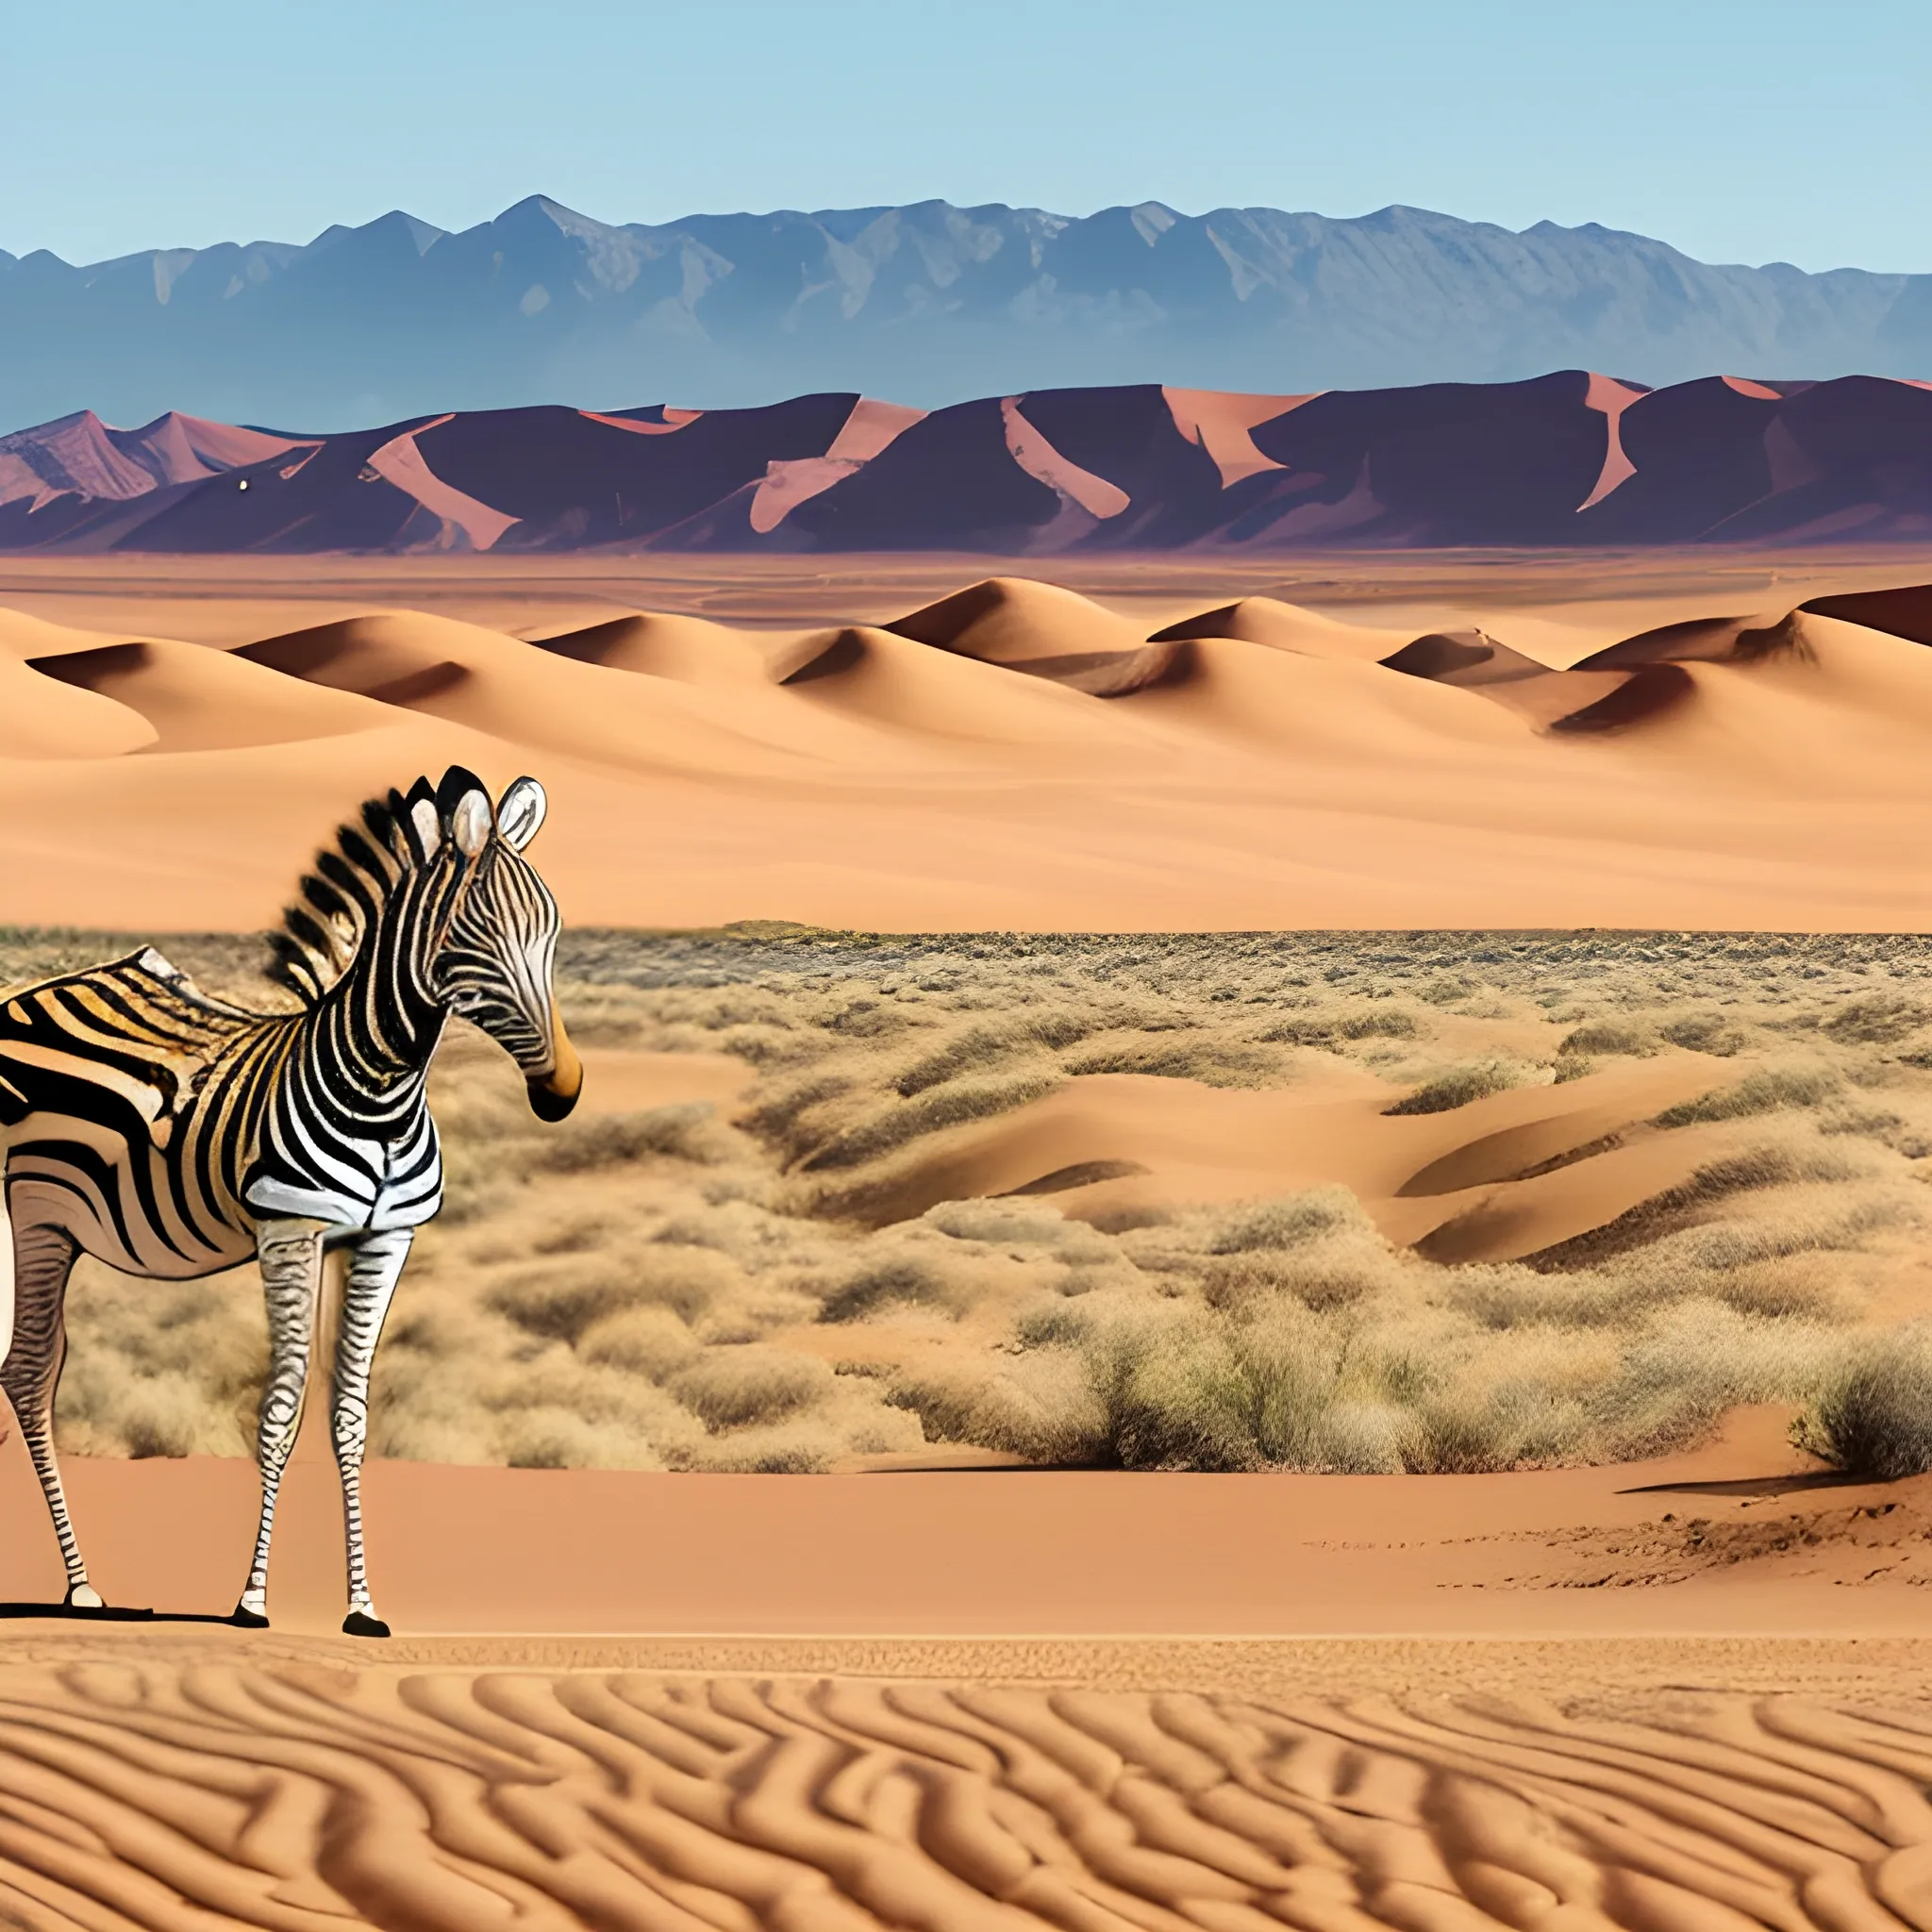 a desert with dunes and a zebra walking in the background